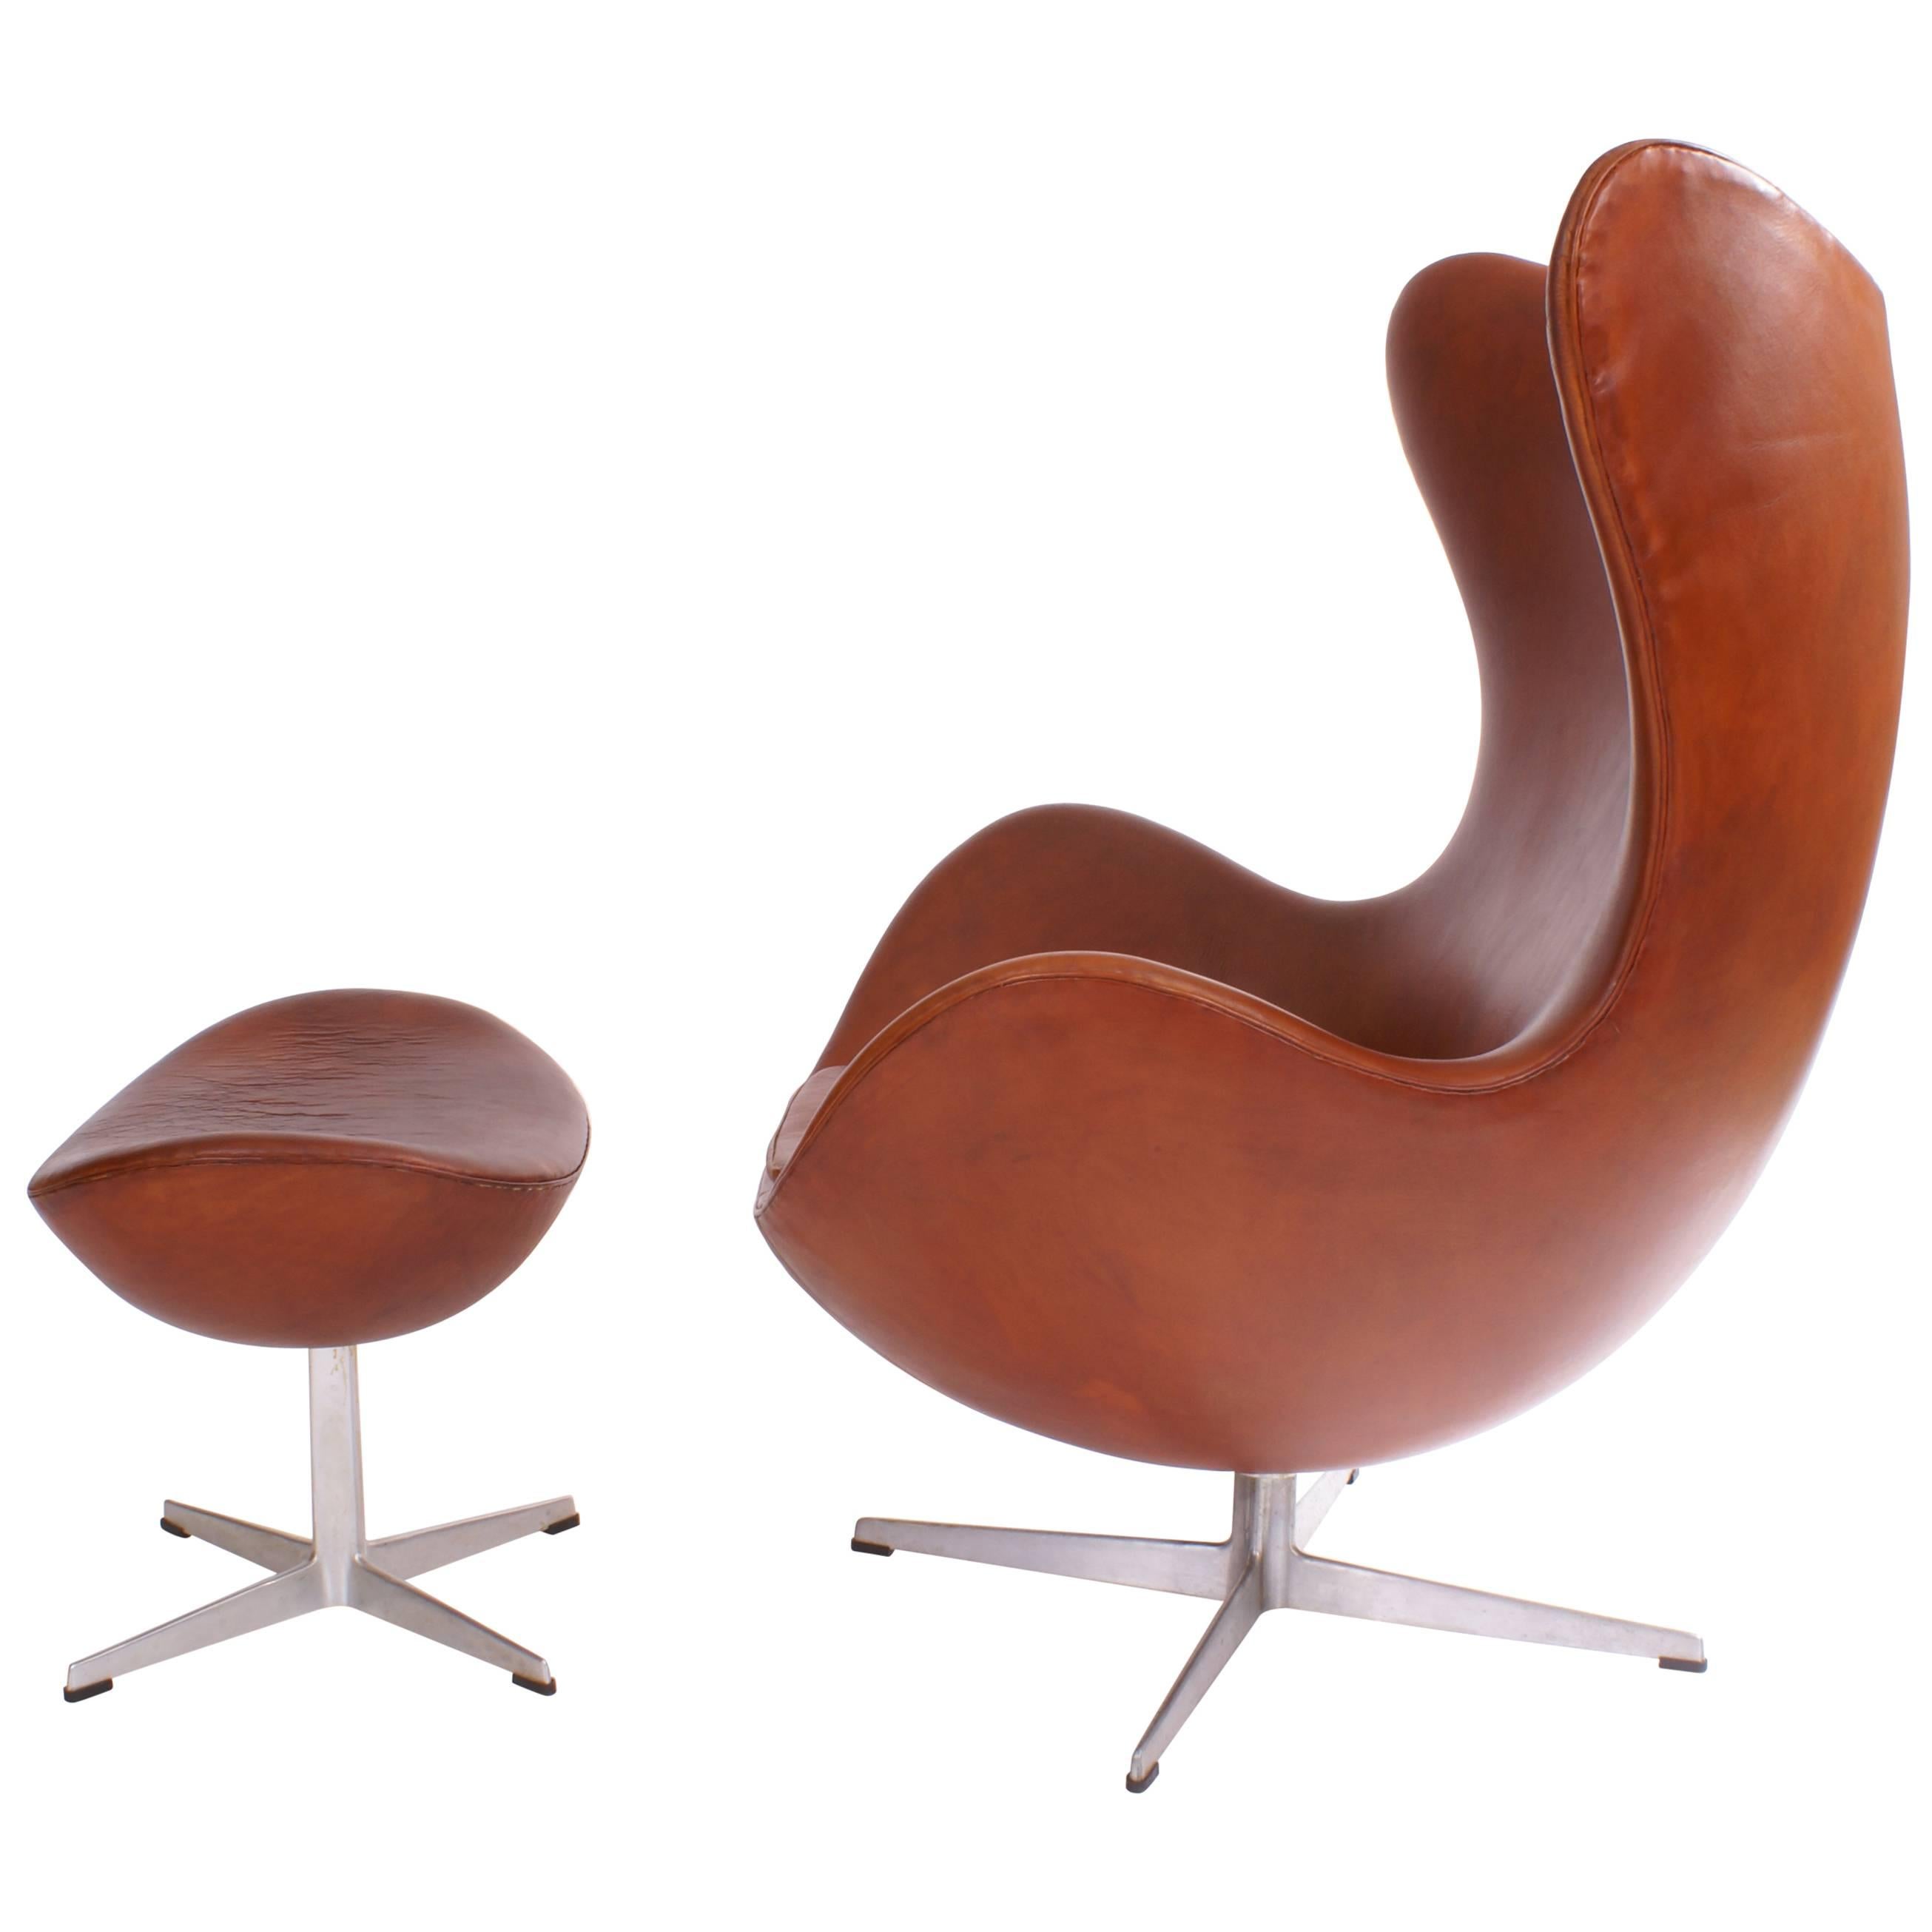 Arne Jacobsen 1960s Egg Chair and Stool in Patinated Leather for Fritz Hansen